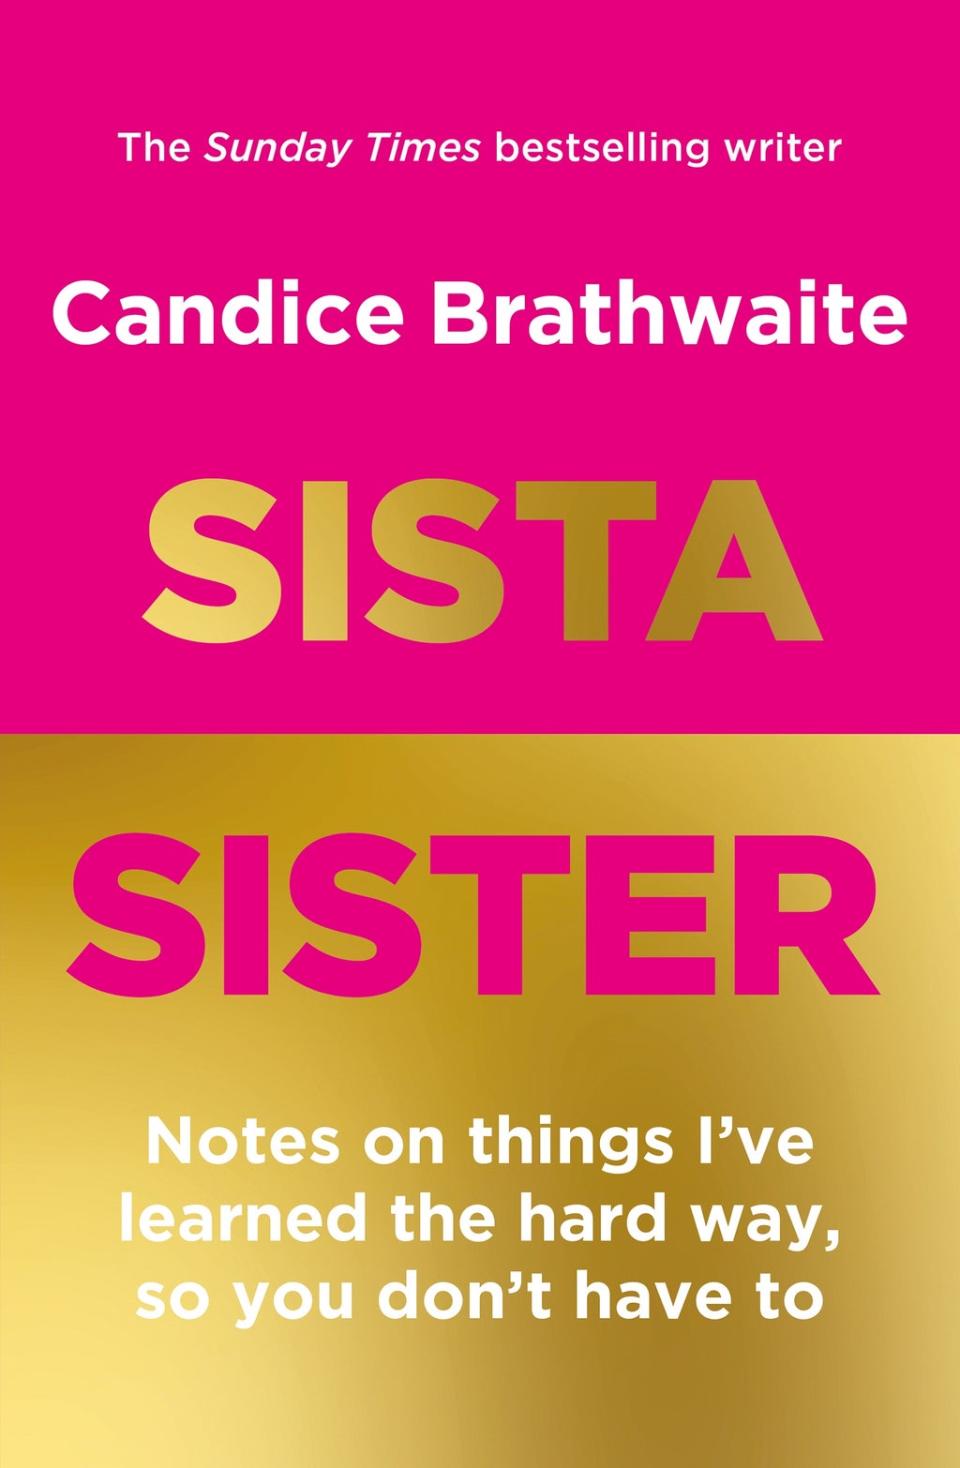  (Sista Sister: Notes on Things I’ve learned the hard way so you don’t have to by Candice Brathwaite (Quercus))